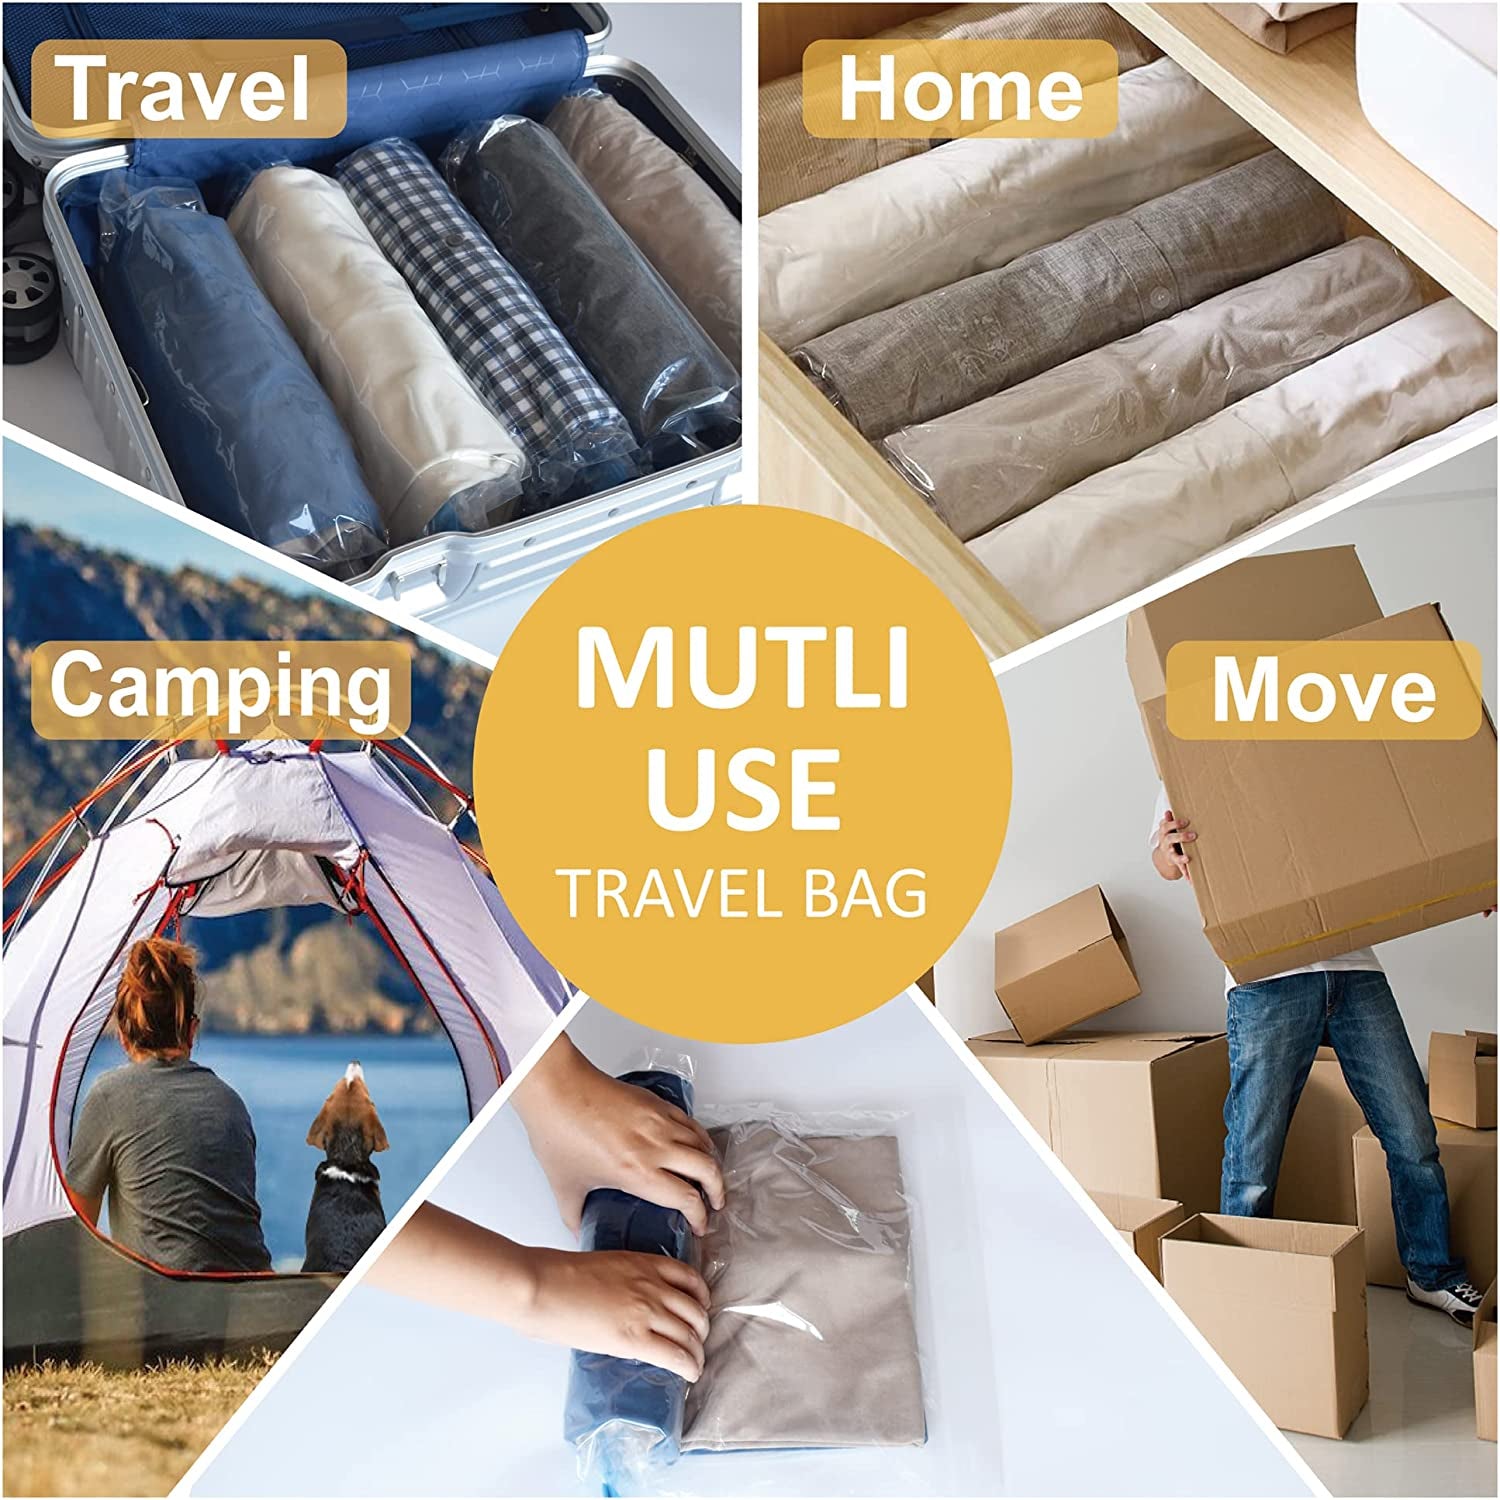 12 Travel Compression Bags Vacuum Packing, Roll up Travel Space Saver Bags for Luggage, Cruise Ship Essentials (5 Large Roll/5 Medium Roll/2 Small Roll)